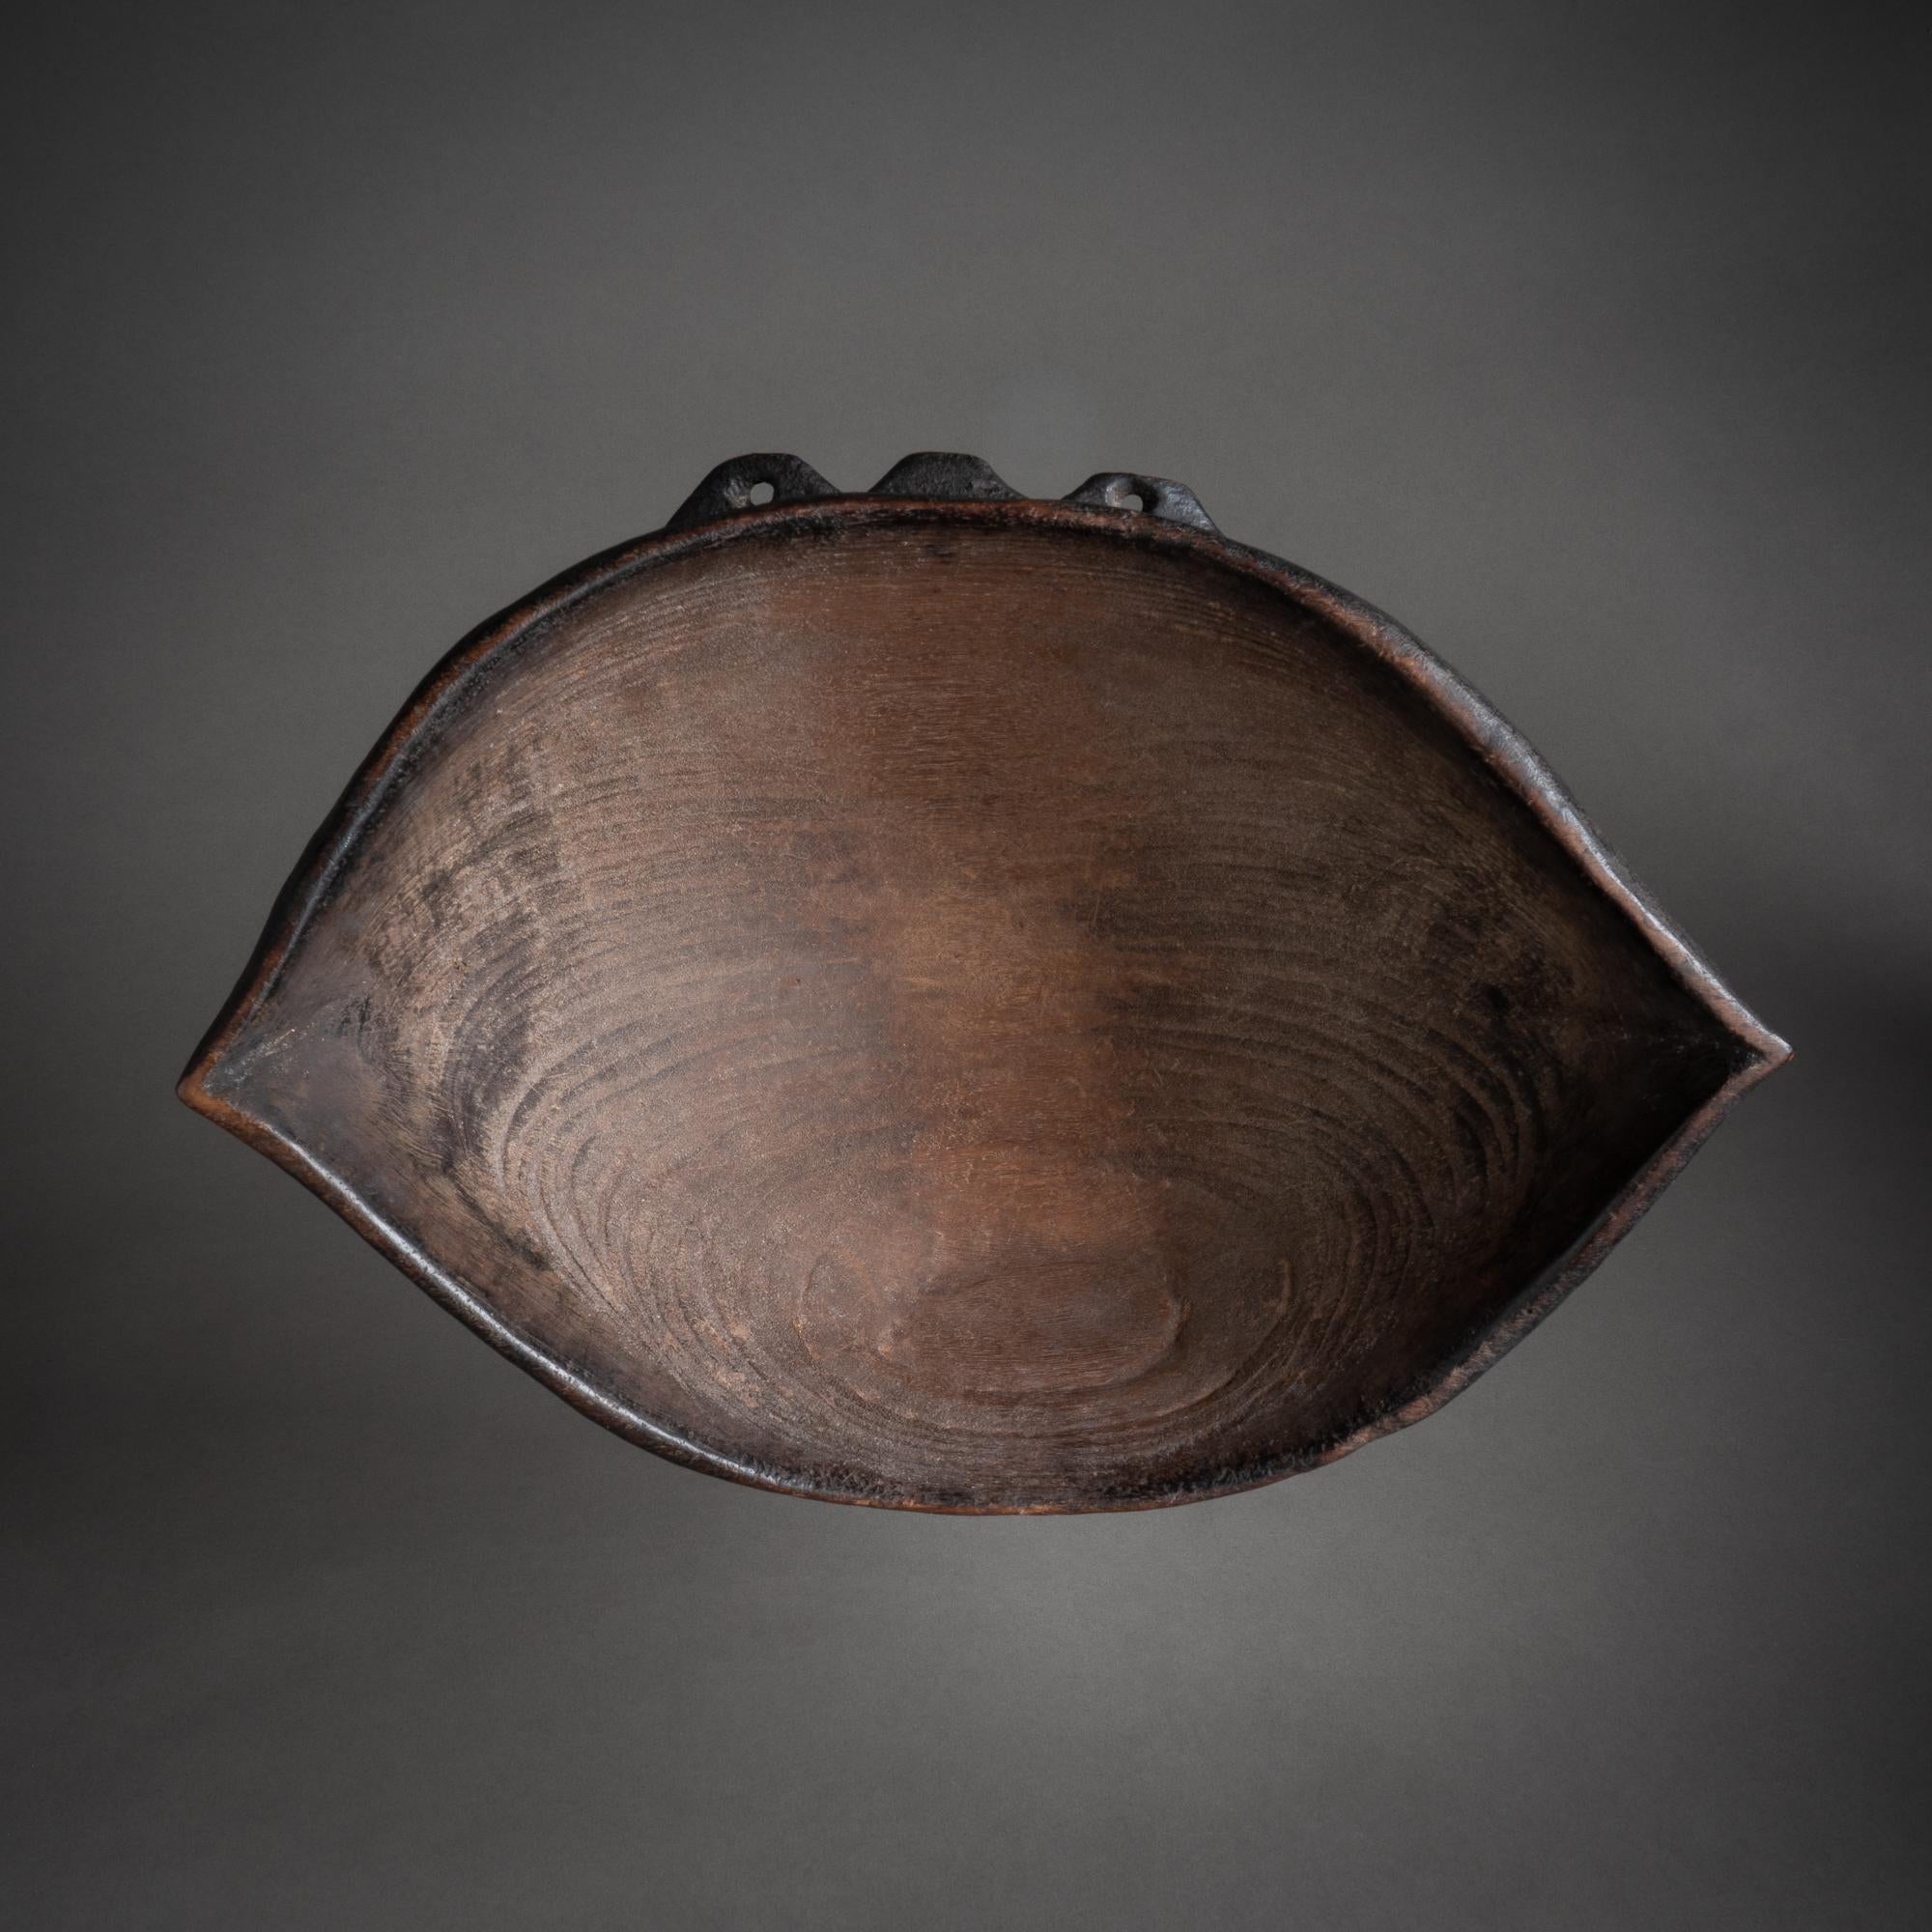 A beautiful wooden bowl in the Classic almond-shaped style of the Lumi, who are located in the heart of the Sandaun Province of the northwestern corner of Papua New Guinea. When not in use, a bowl such as this would be hung from the wall by its